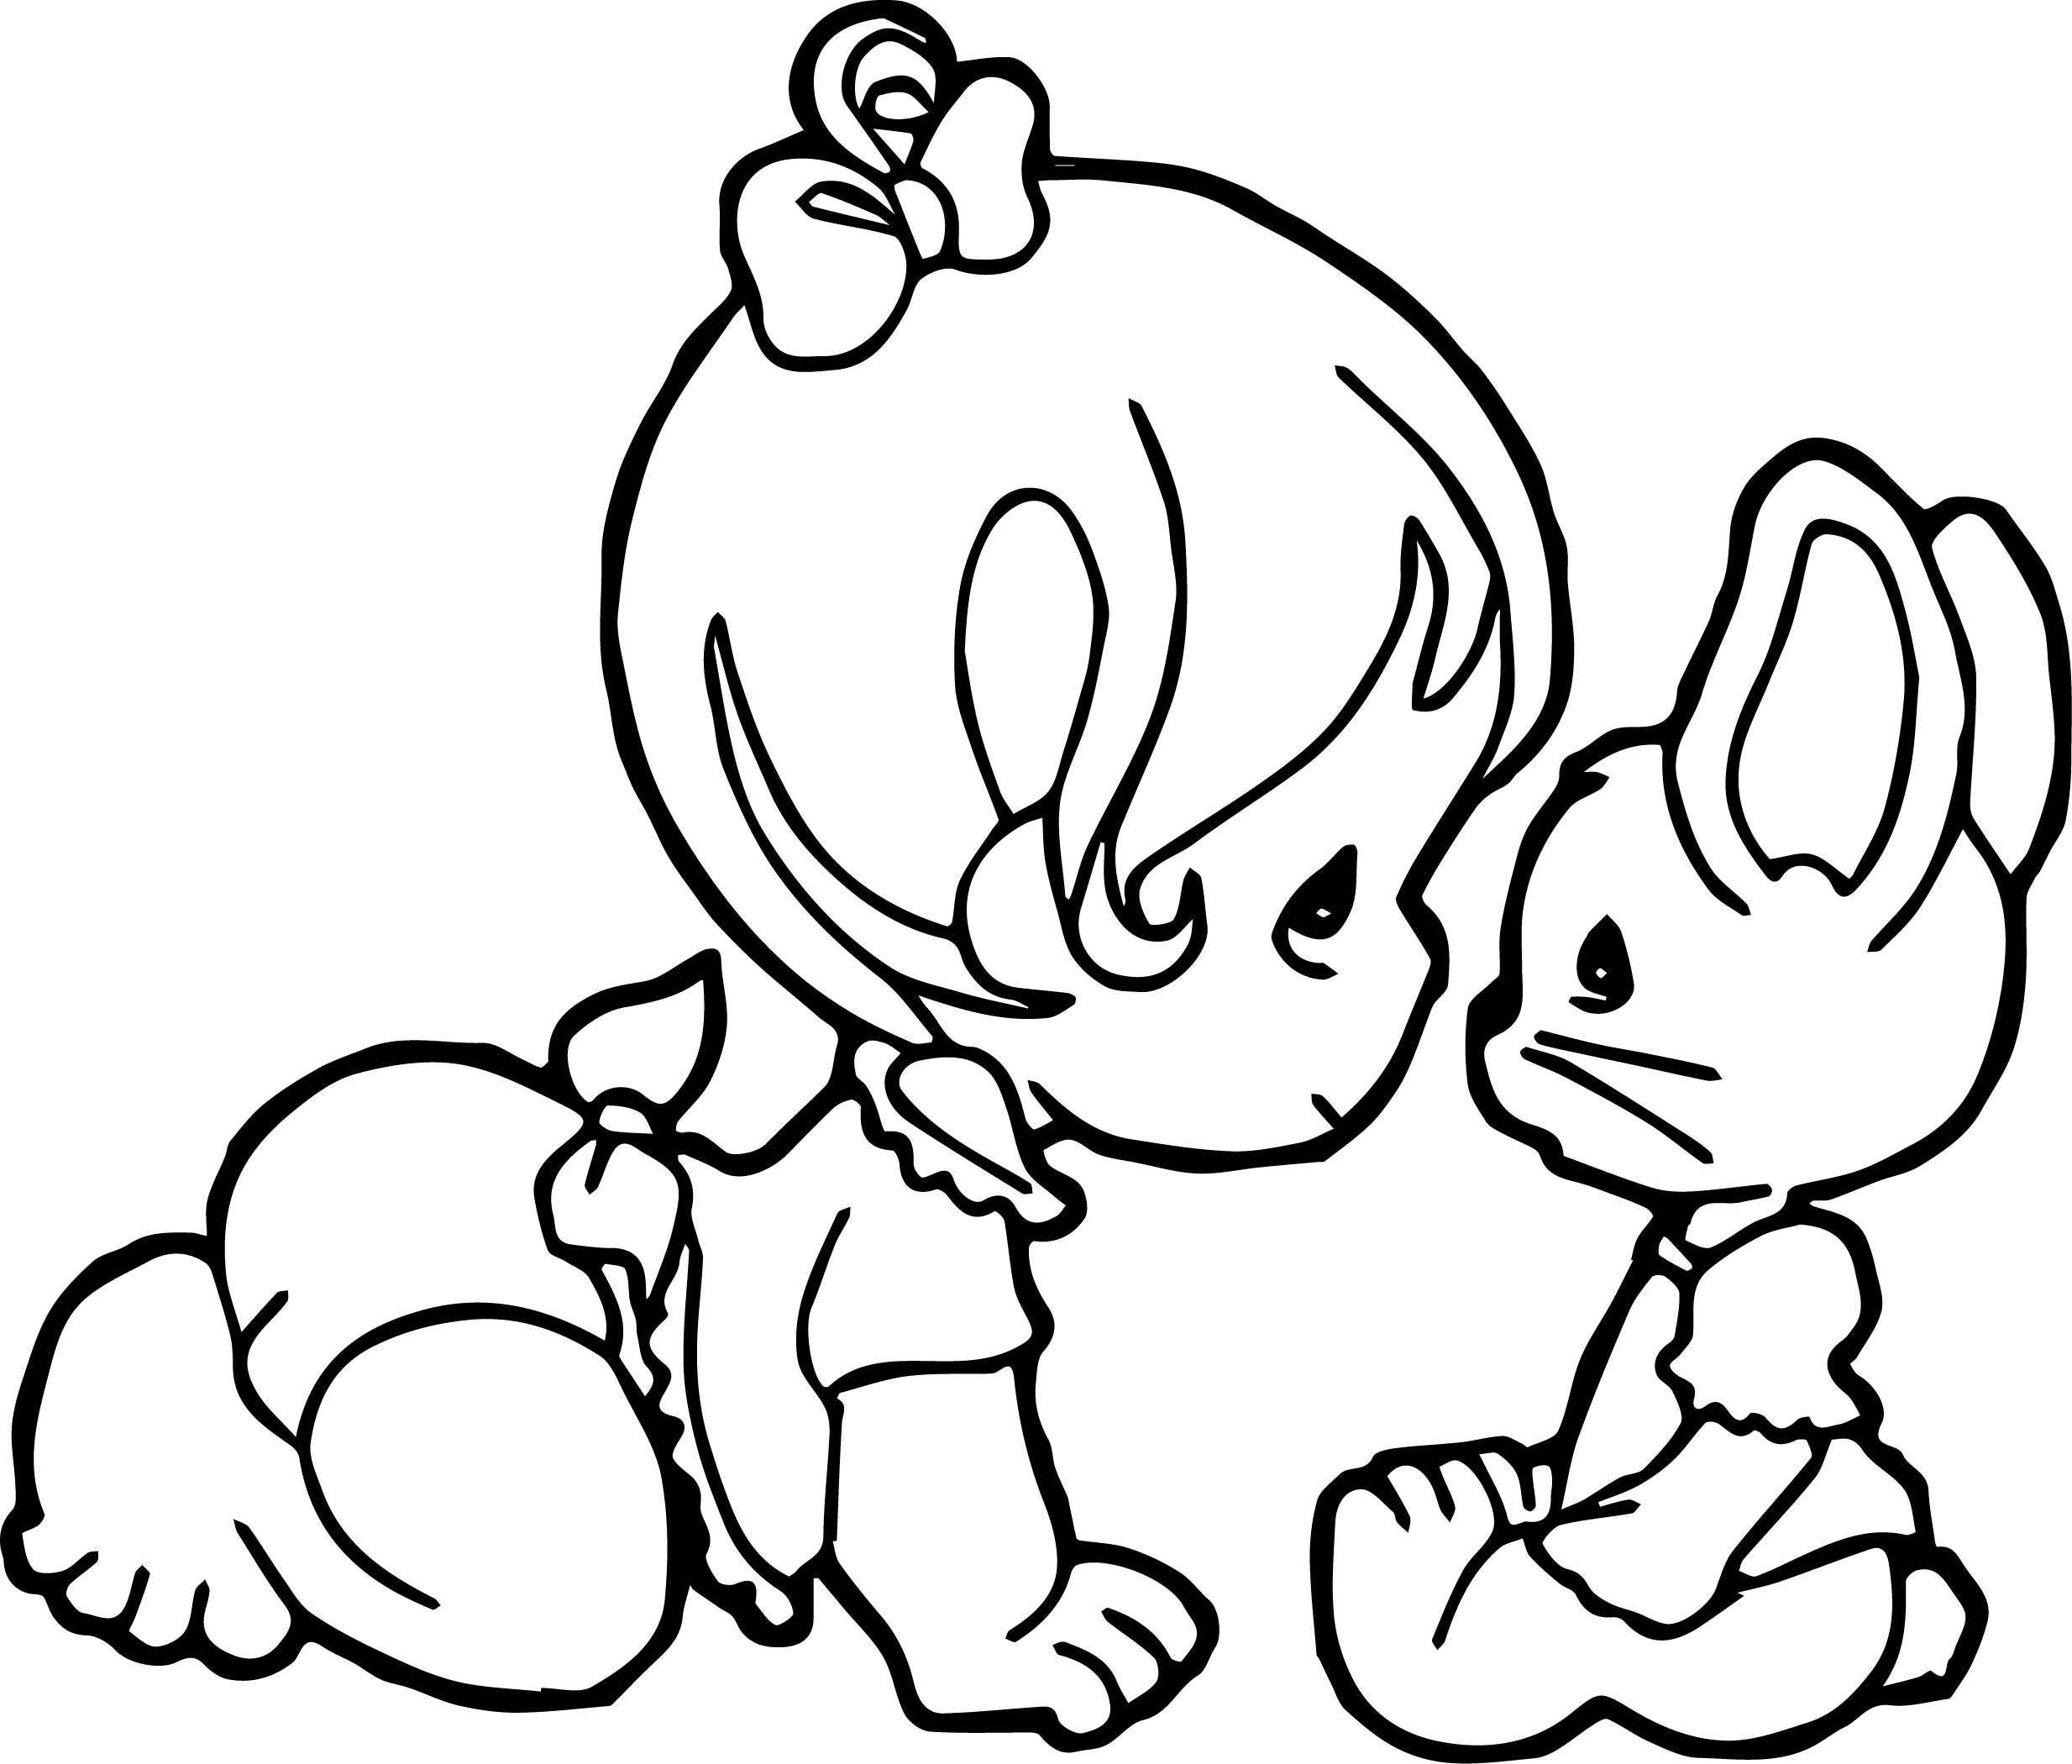 Baby Bunnies Coloring Pages
 Bunny Coloring Pages